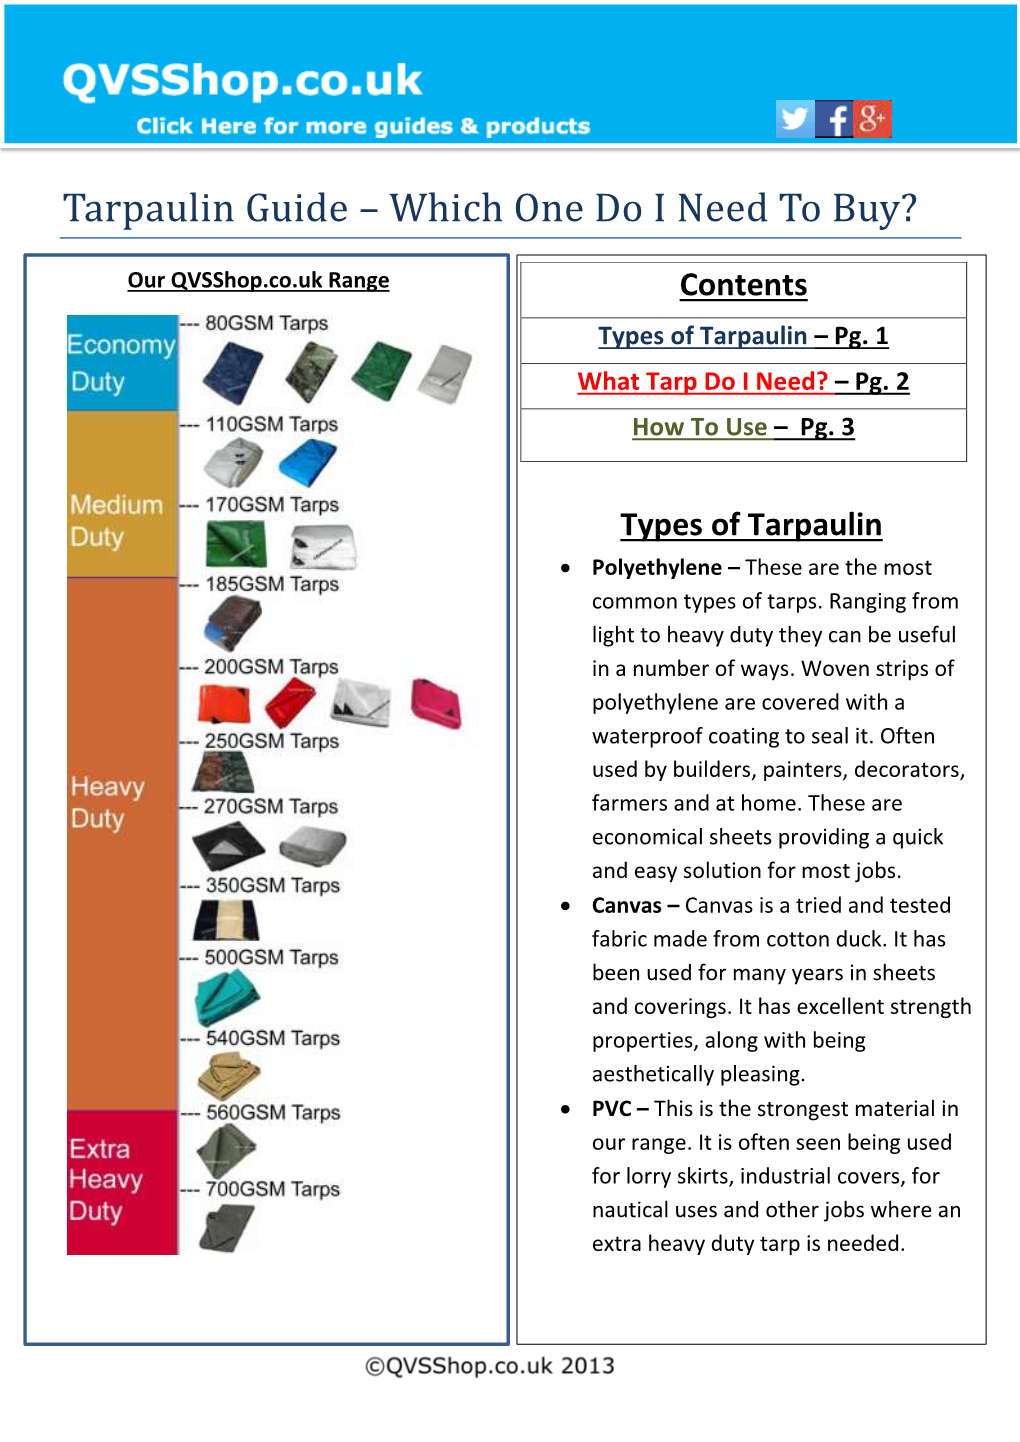 Tarpaulin Guide – Which One Do I Need to Buy?